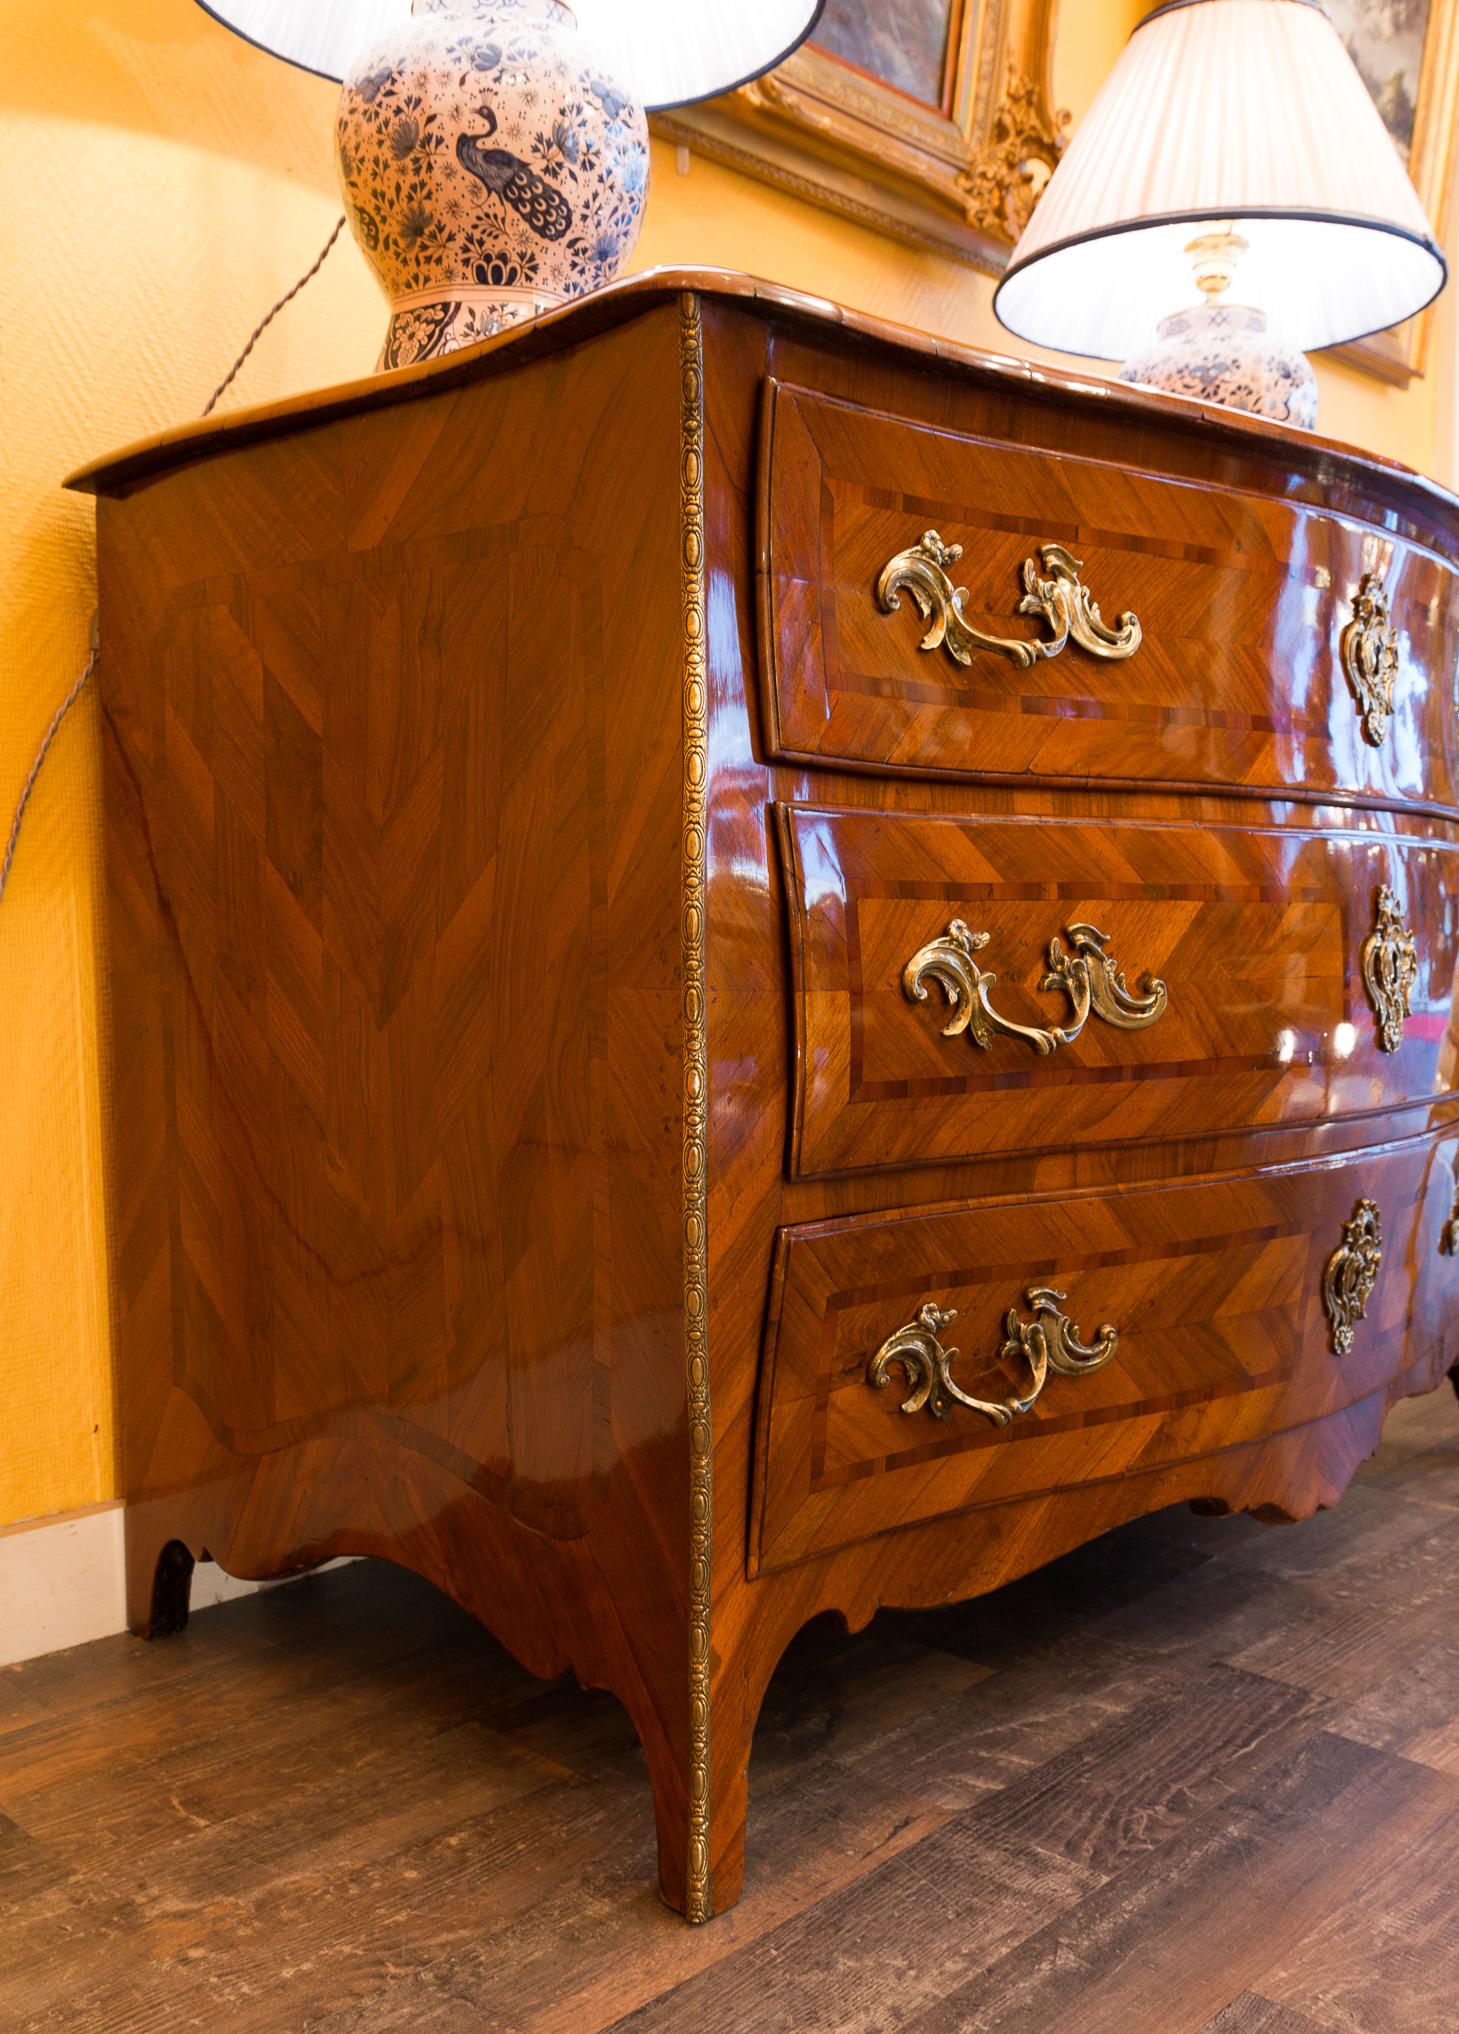 Italian Louis XV Period Walnut and Marquetry Serpentine Commode, circa 1750 For Sale